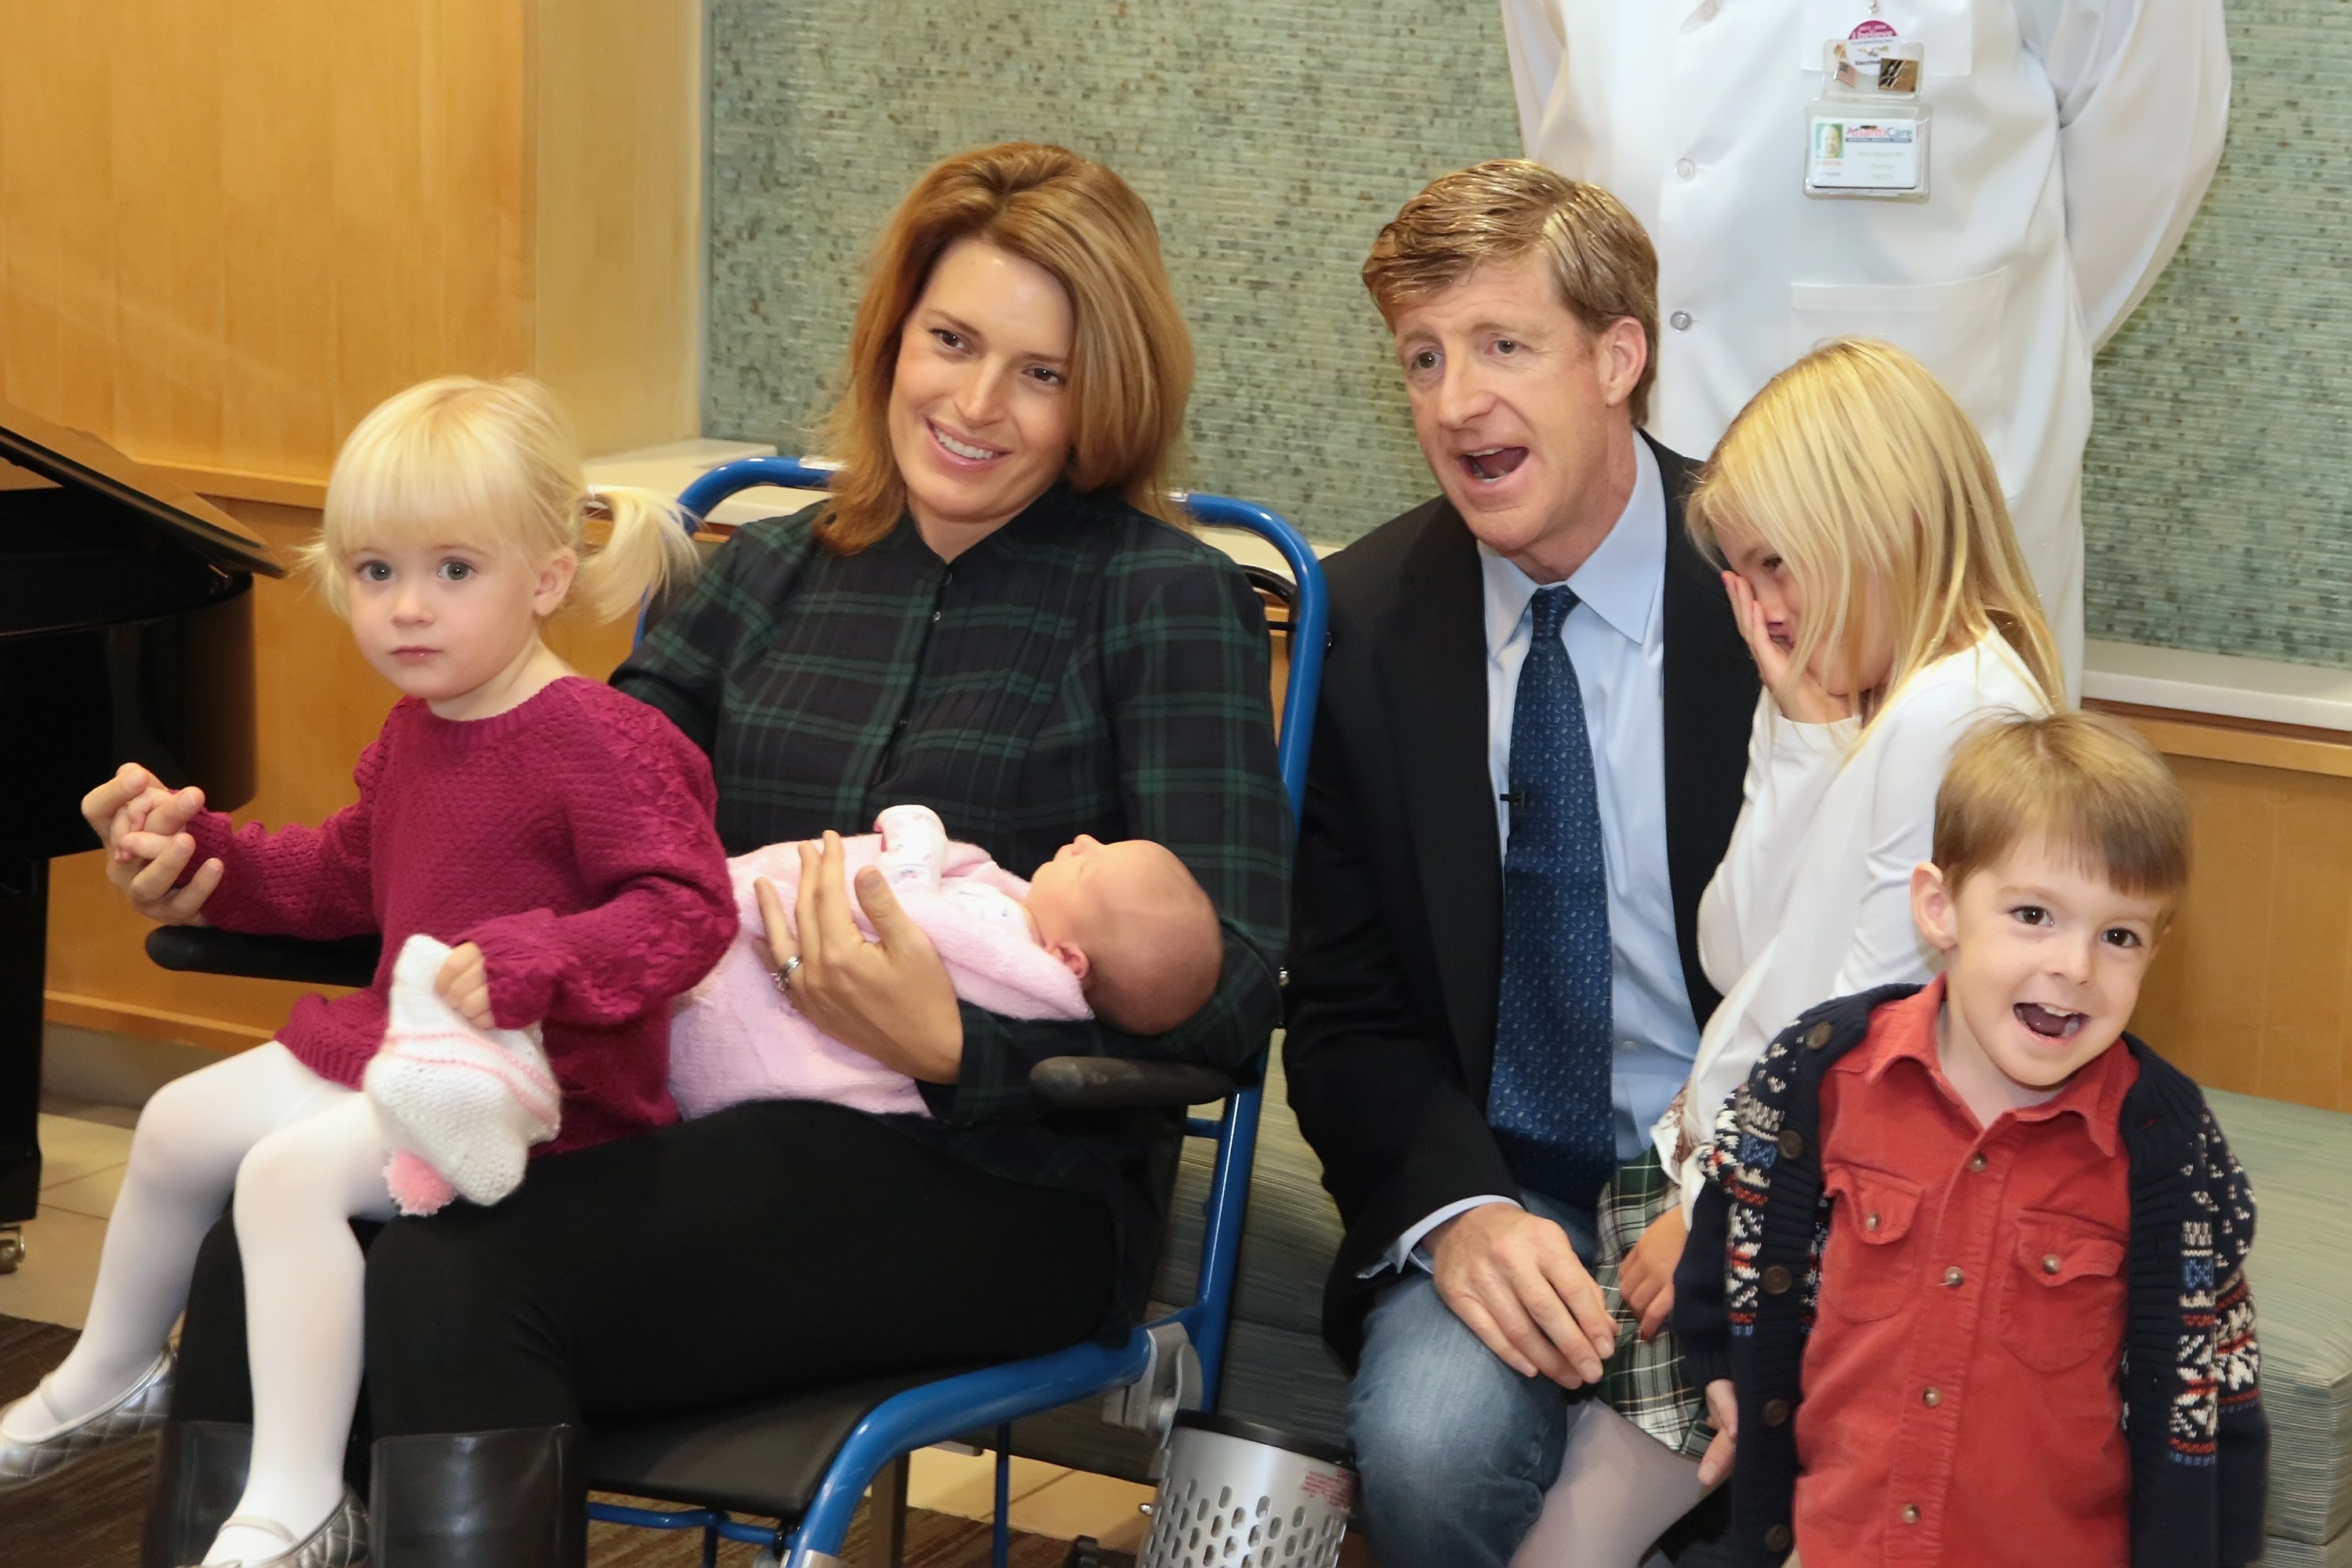 Nora Kara, Amy and her newborn daughter, Nell Elizabeth, Patrick, Harper Gray, and Owen Patrick at the AtlantiCare Regional Medical Center on December 1, 2015, in Pomona, New Jersey | Photo: Donald Kravitz/Getty Images